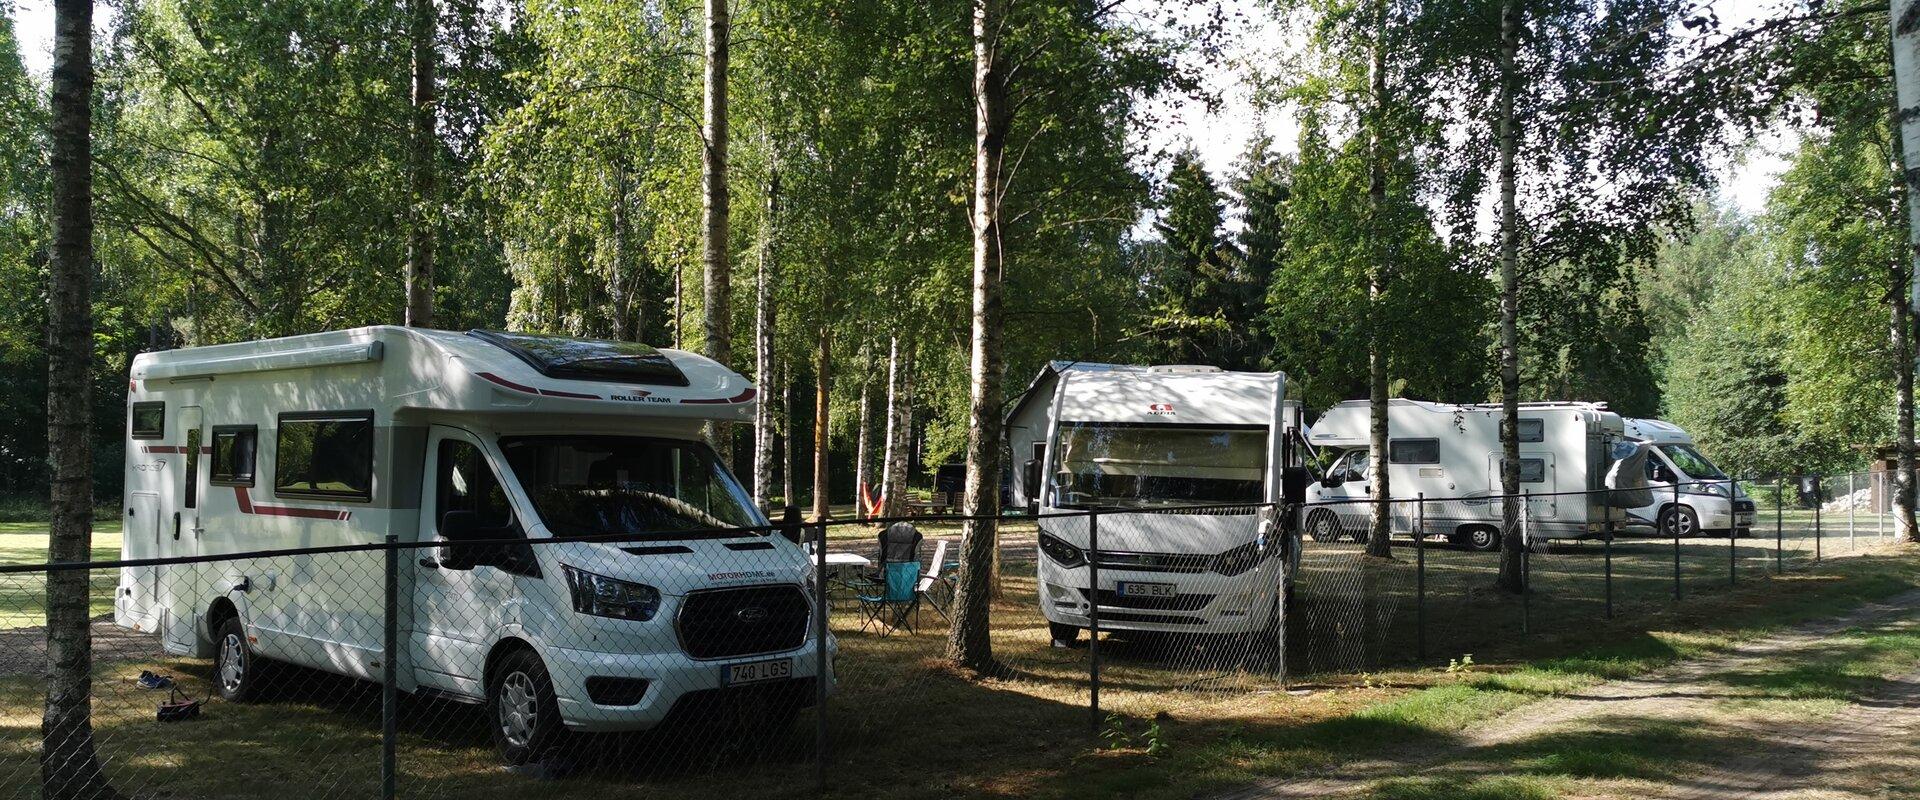 If you are exploring the Onion Route in a campervan or caravan, you can spend the night at Peipsi Caravan camping. The recreation area, which has been